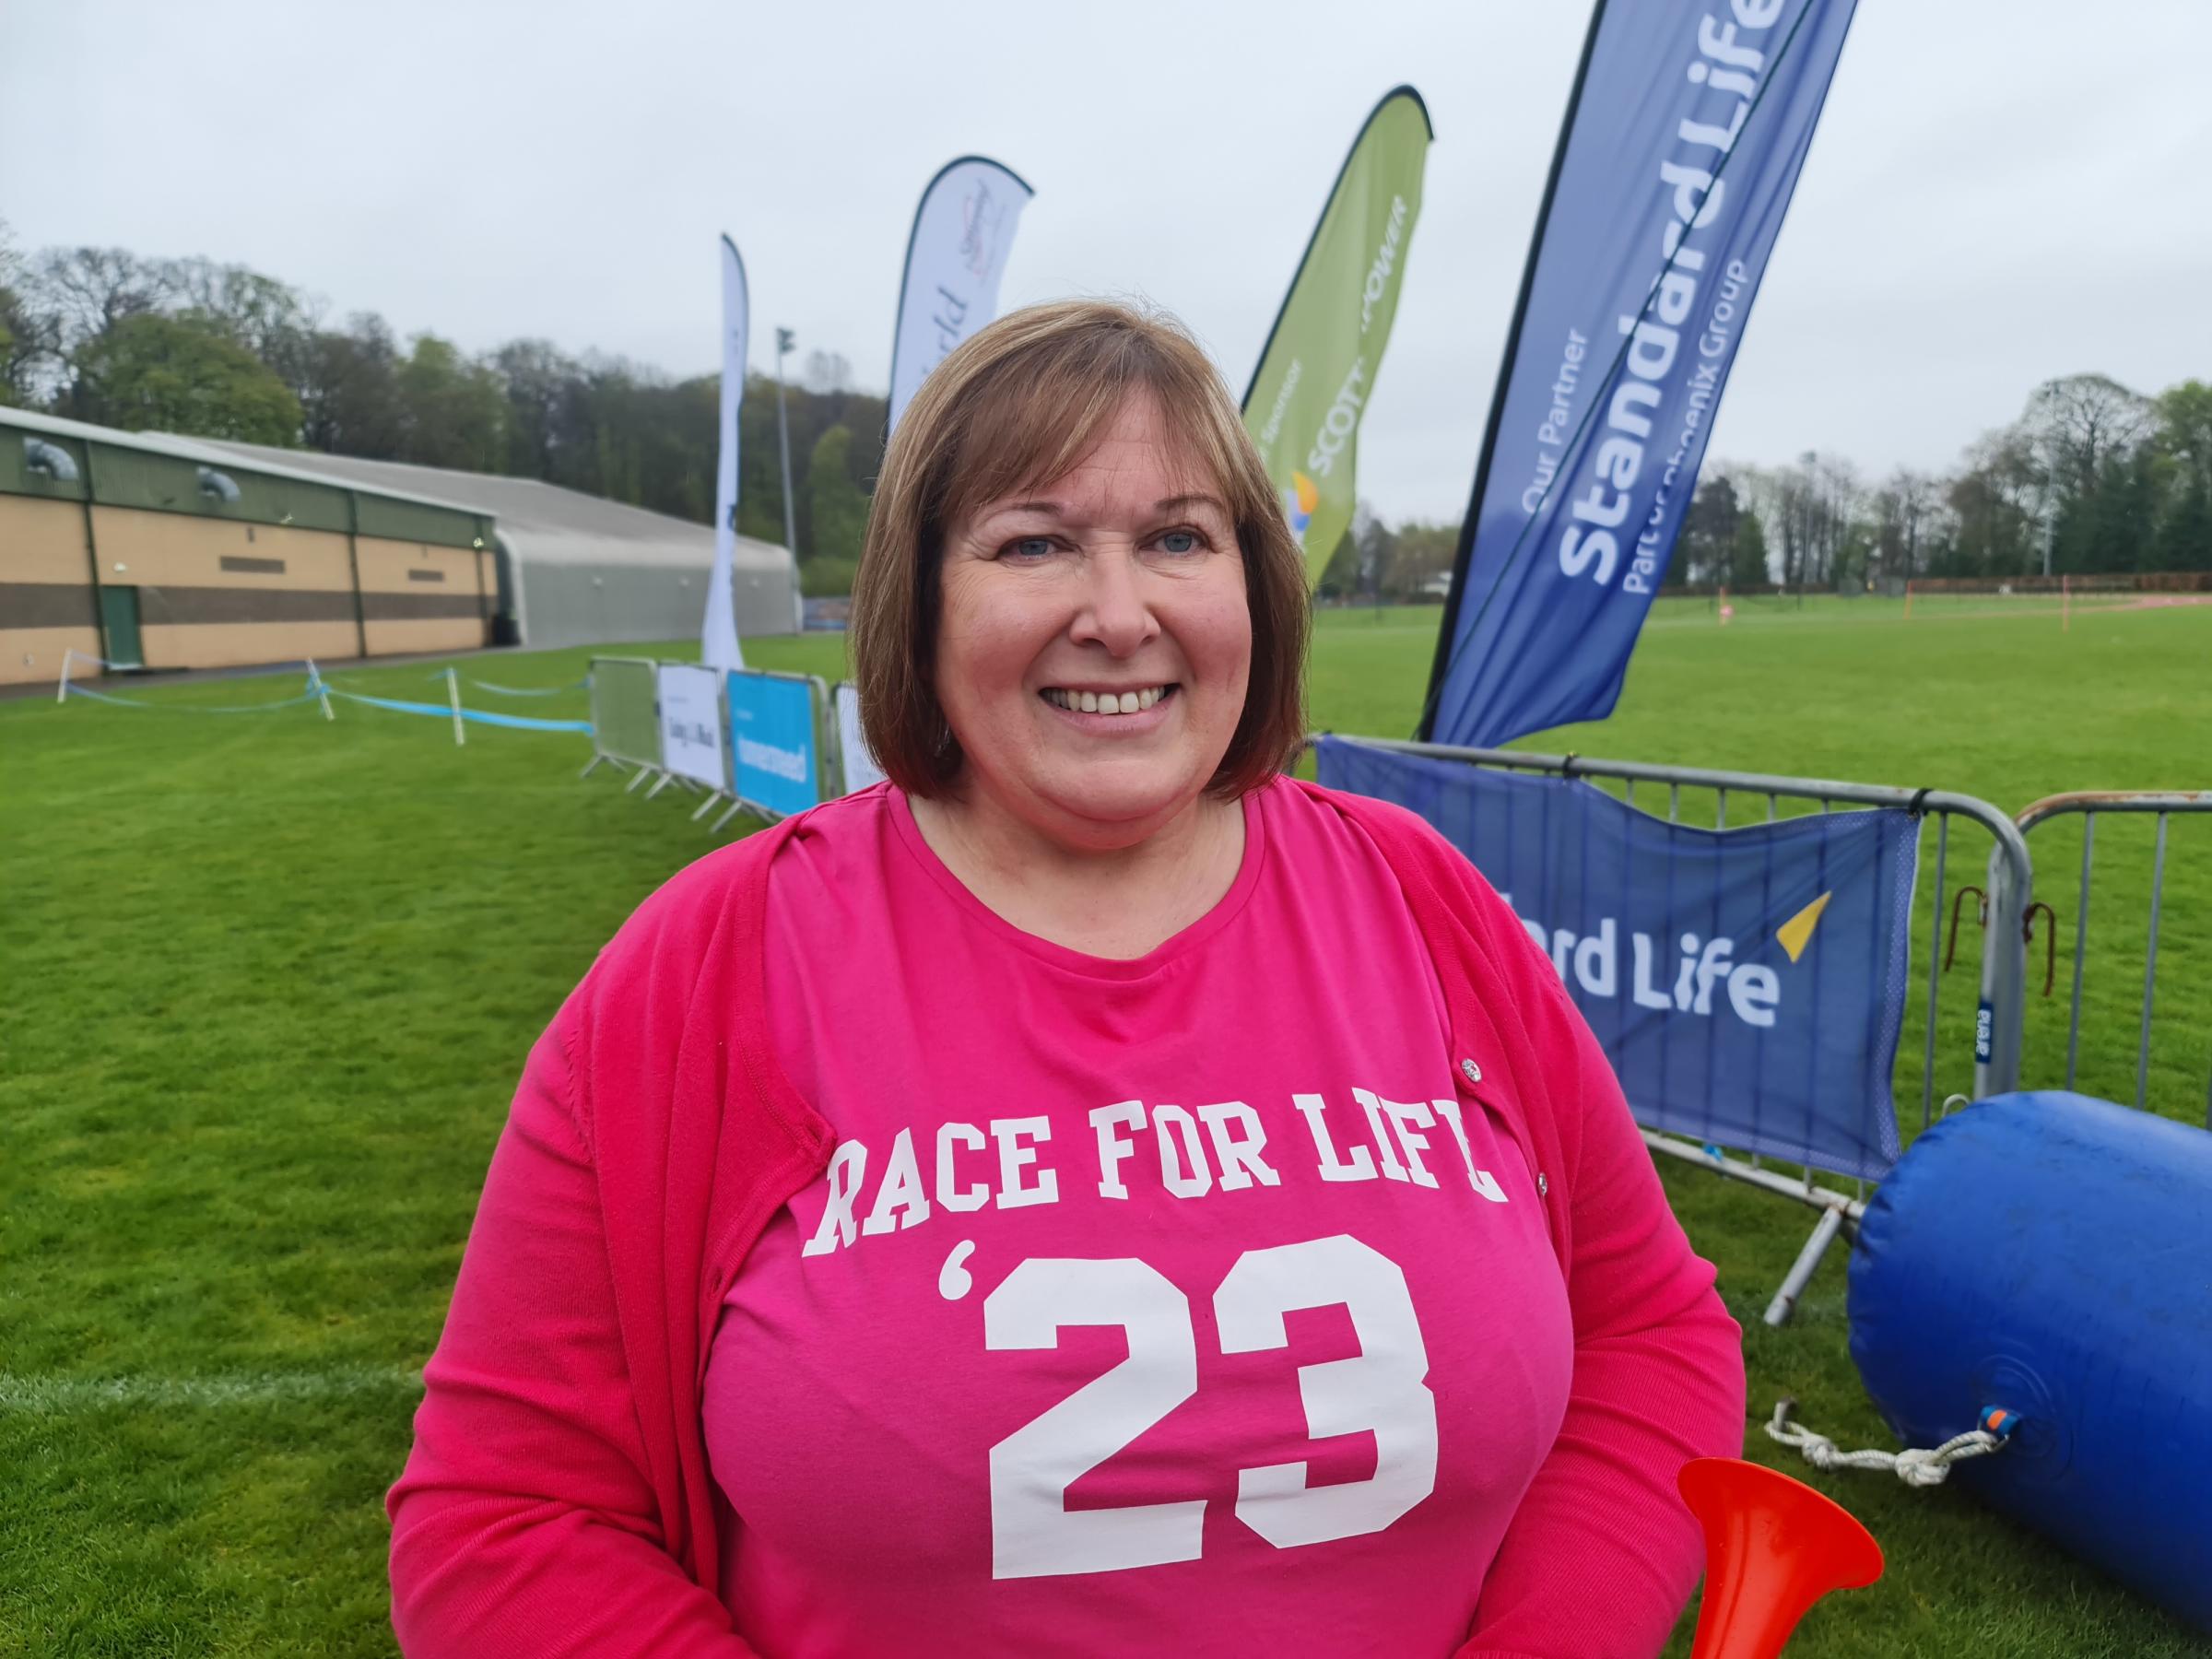 Fiona Conaghan sounded the horn to start the Race for Life in memory of her son, Stuart Hutchison. Pictures by Race for Life.